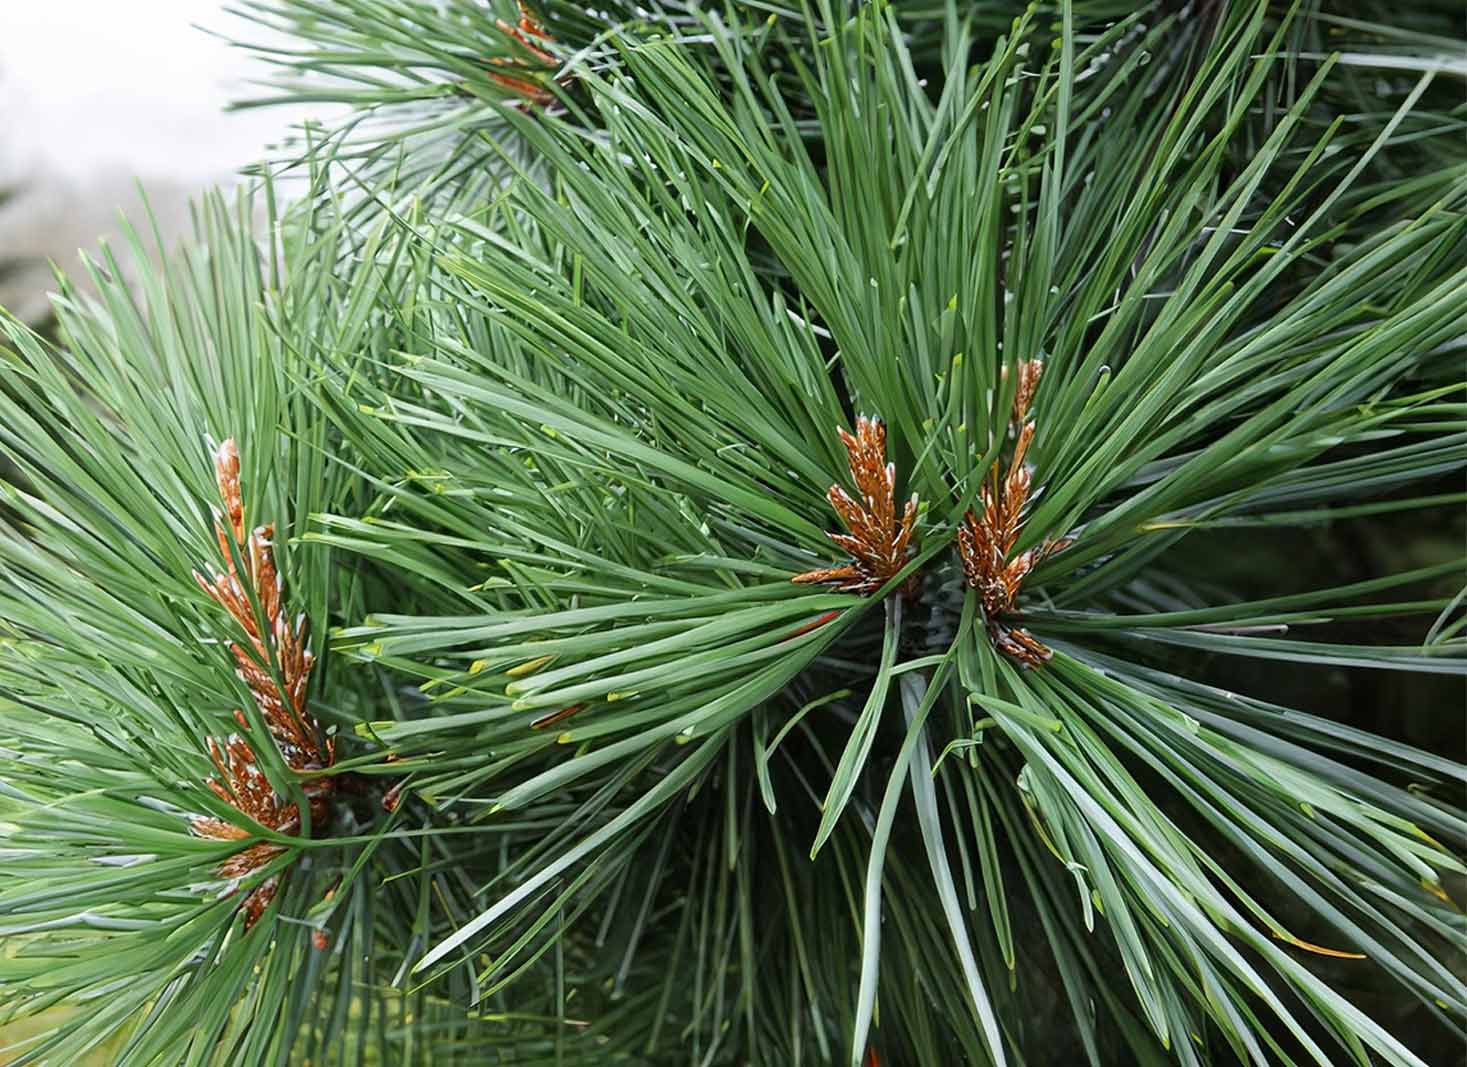 A picture of a pine tree with soft needles